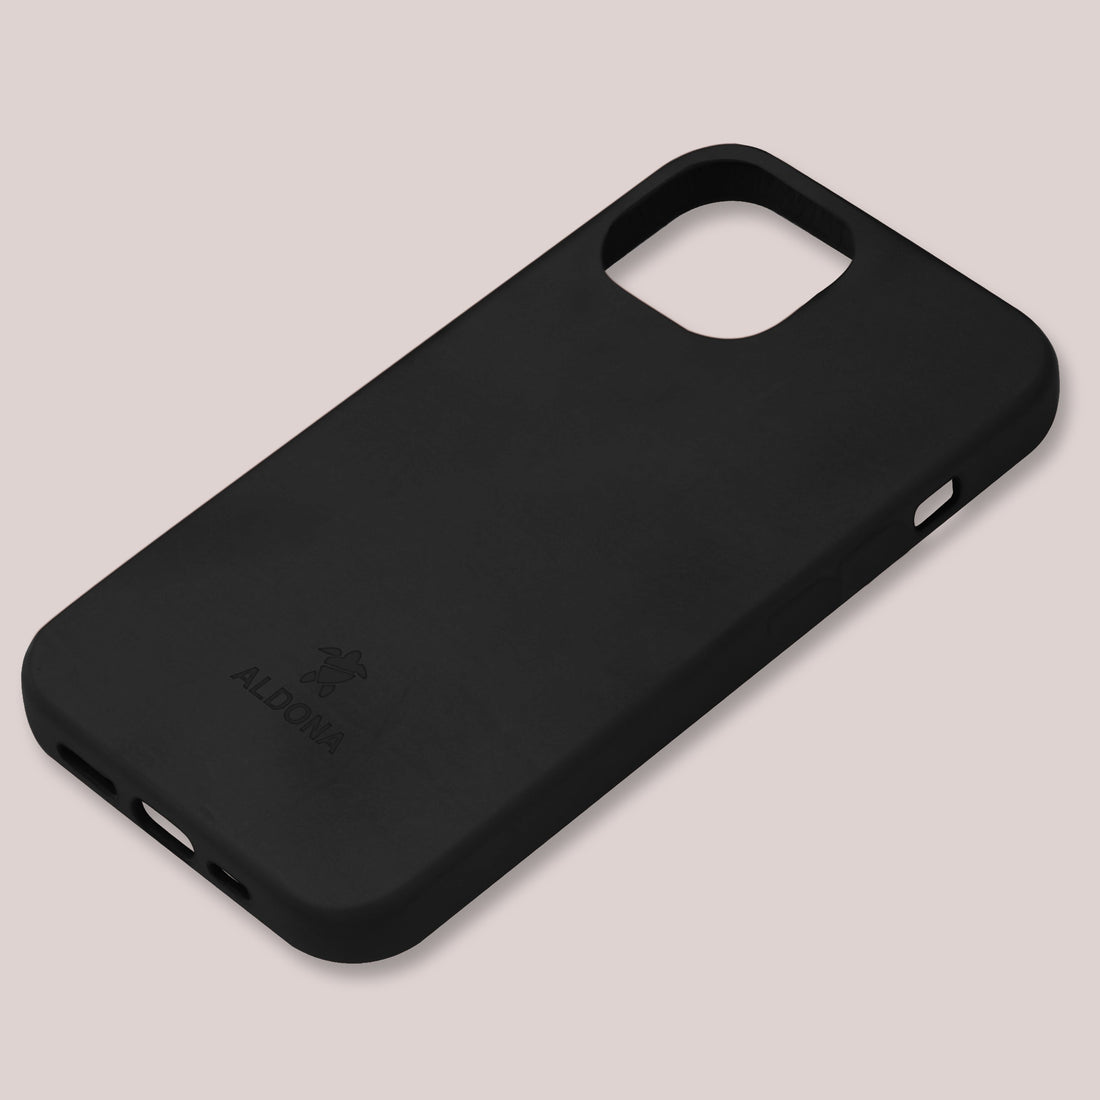 Kalon Case for iPhone 13 with MagSafe Compatibility - Dark Soil